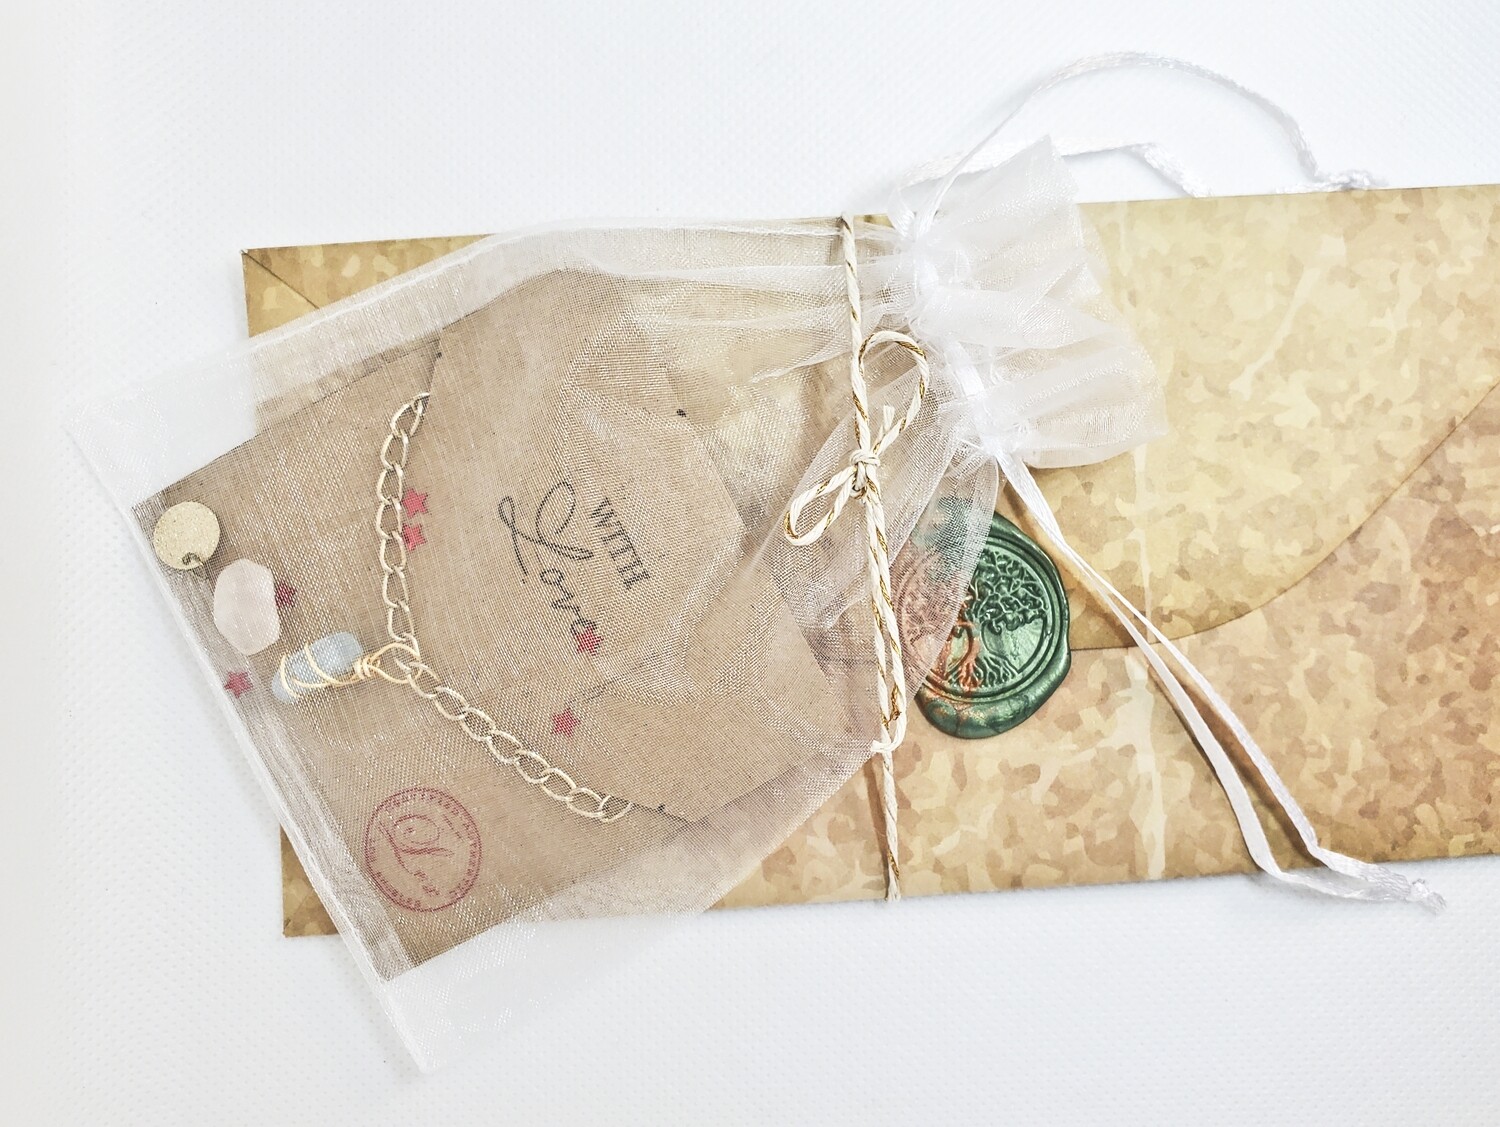 Character Inspired Amulet & Chain Necklace, Free Letter Inspired From Desired Character & Extras